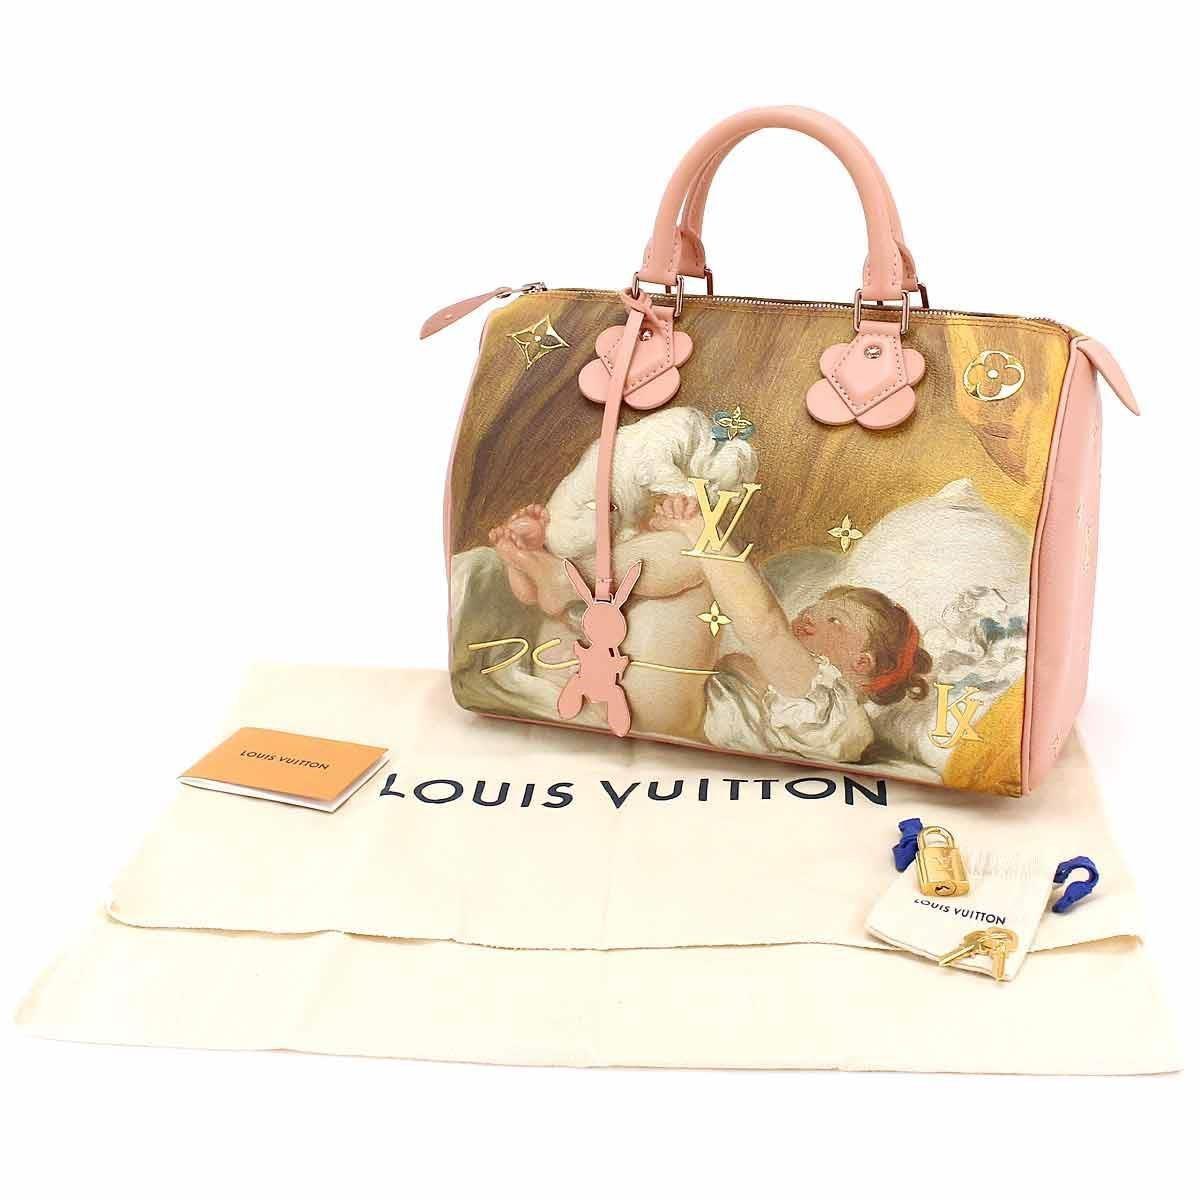 Louis Vuitton Bumbag M43644 Monogram Multicolor Coated Canvas Backpack -  Tradesy